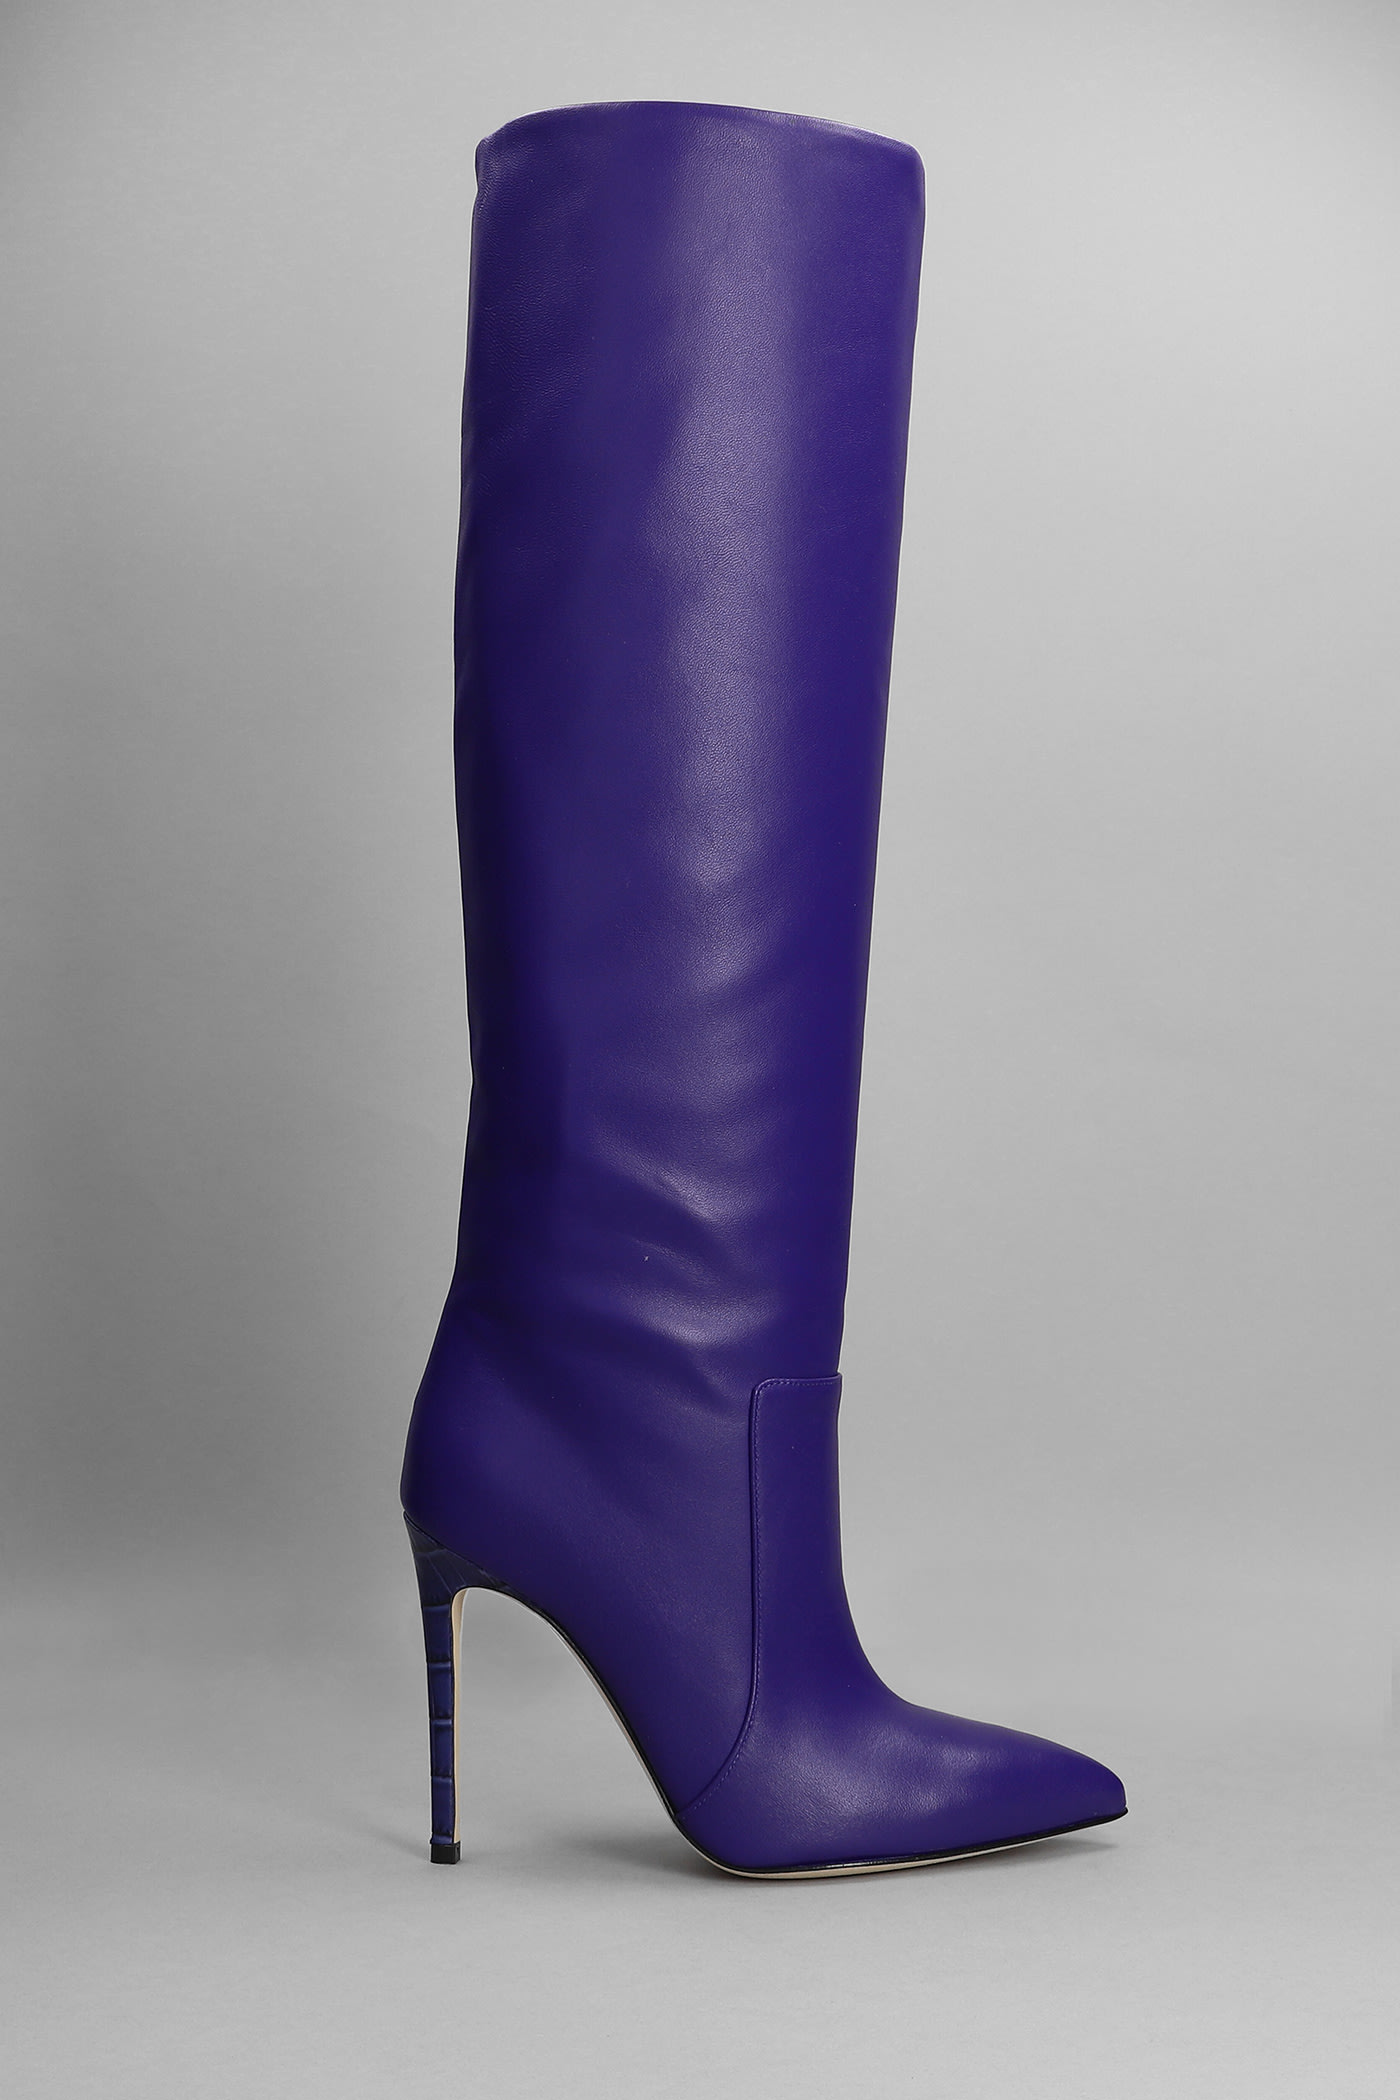 Paris Texas High Heels Boots In Viola Leather